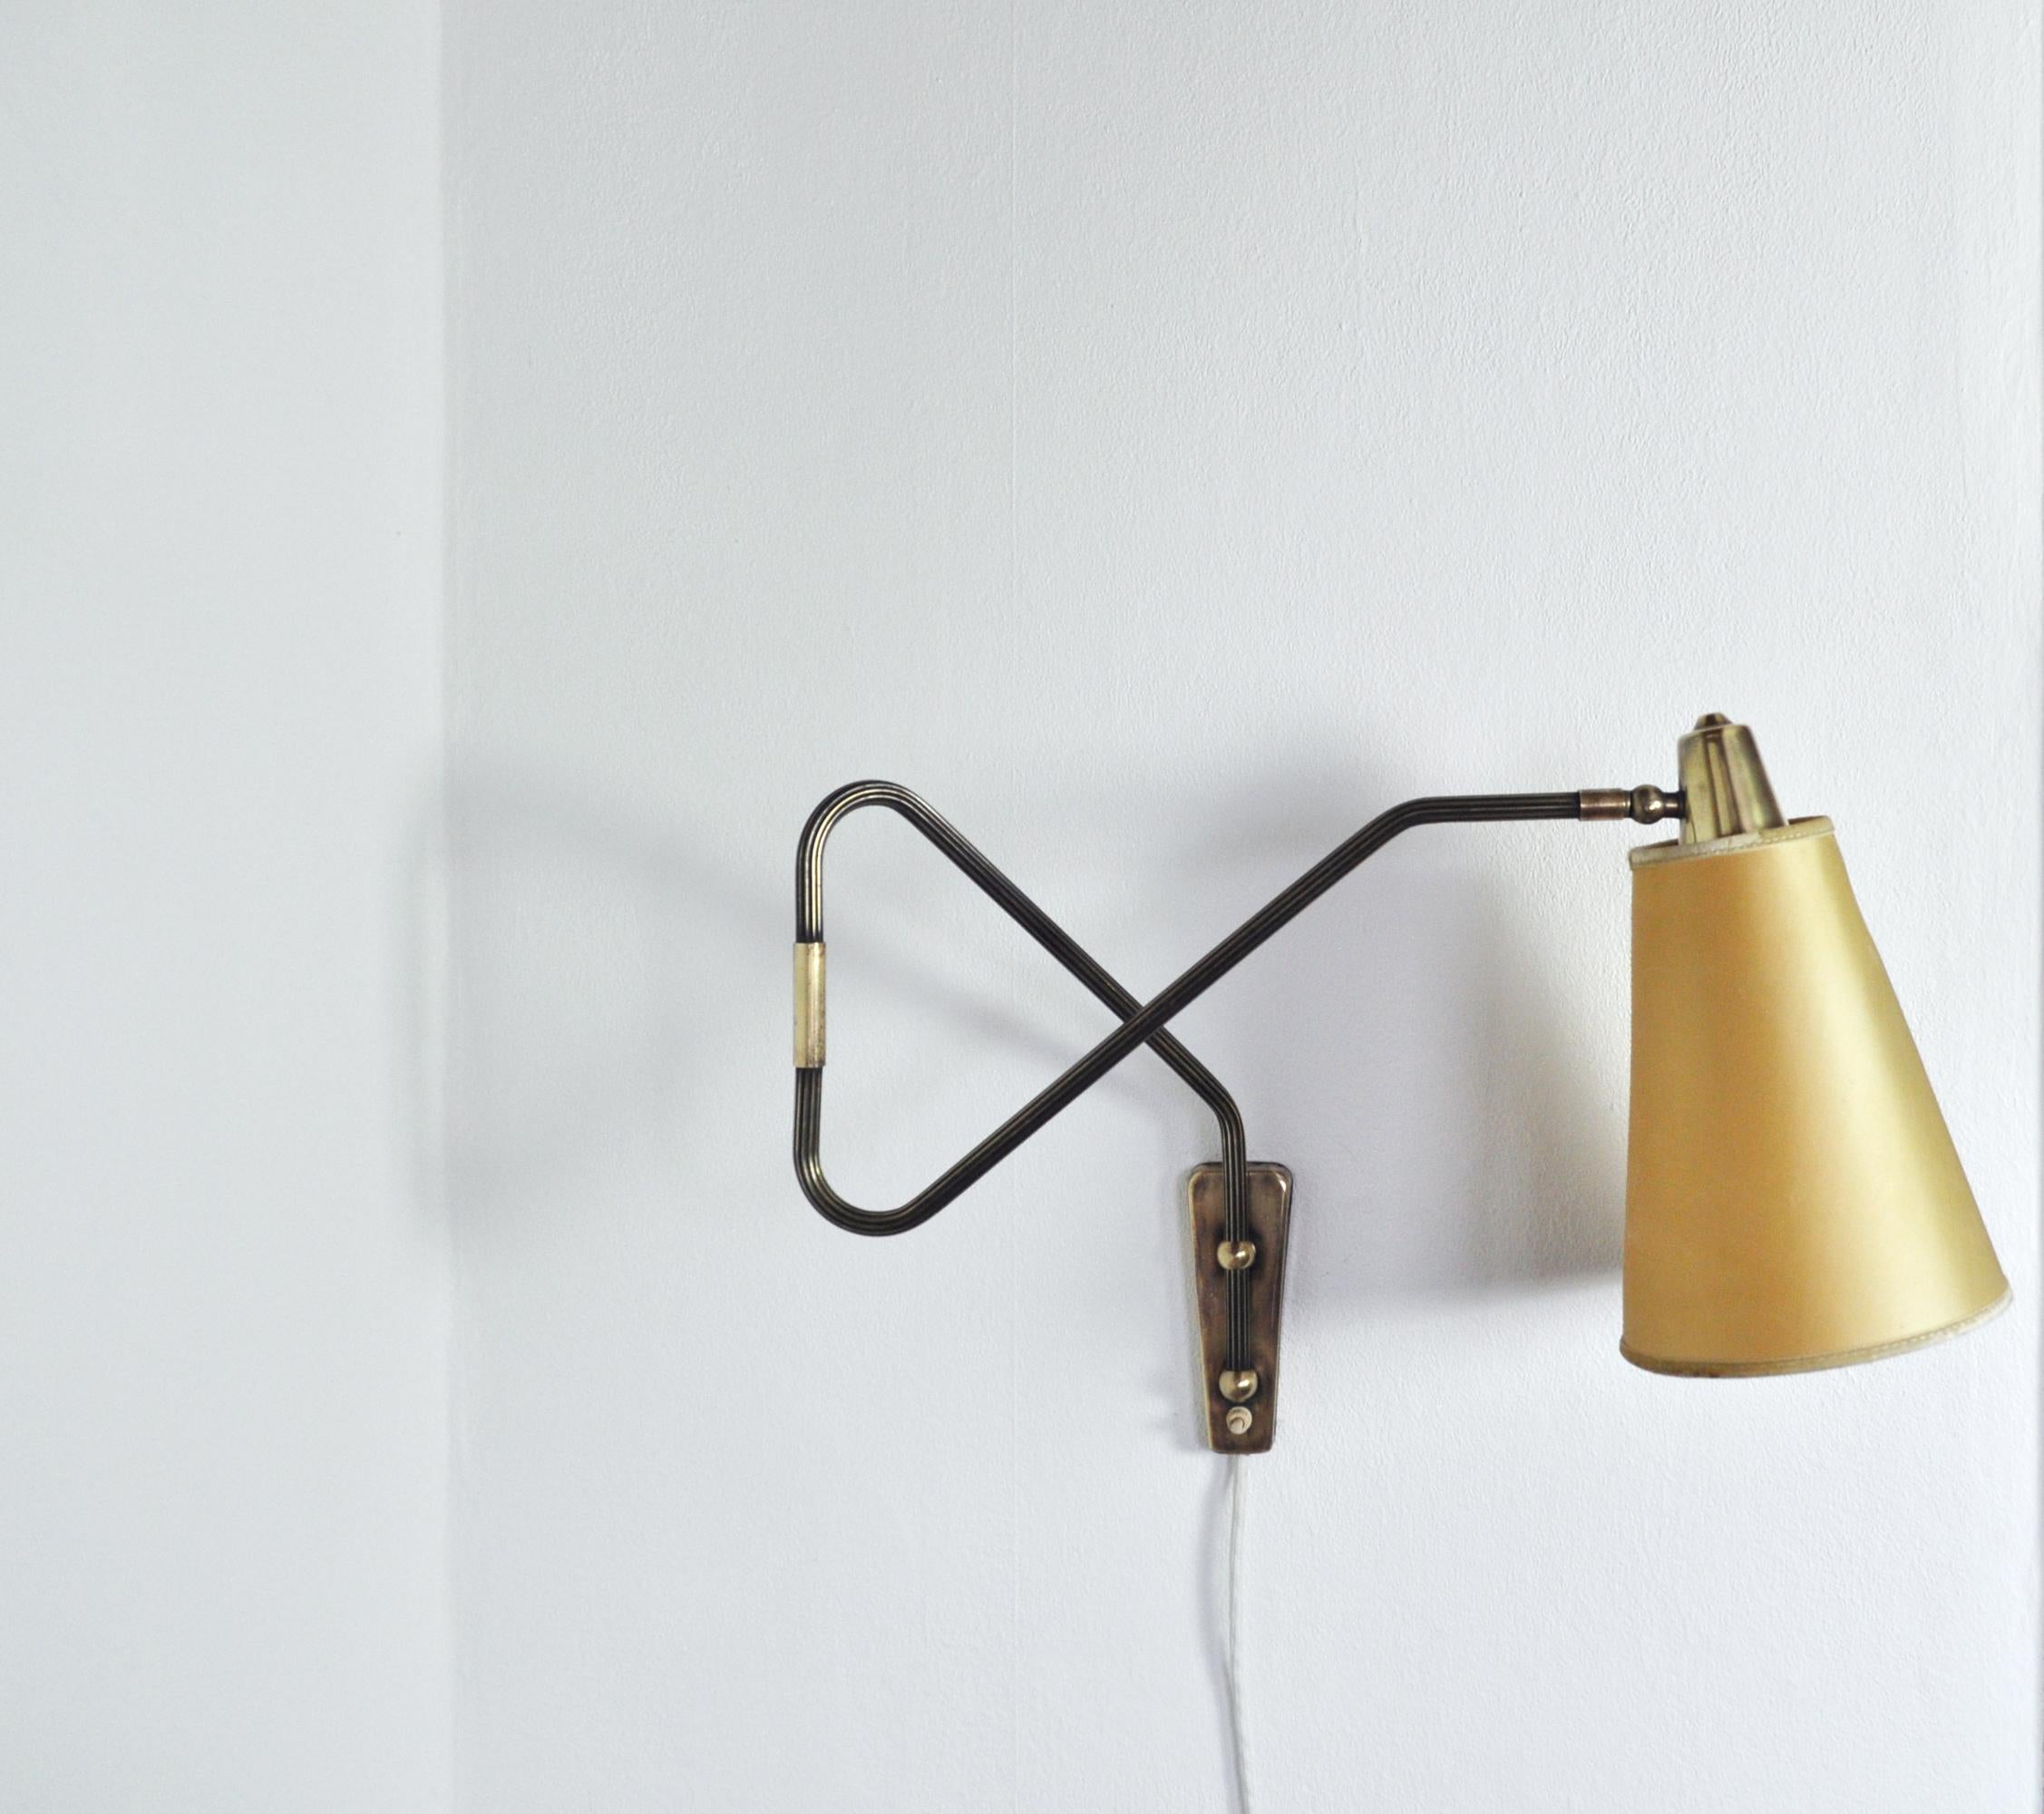 20th Century Danish Swing Arm Brass Wall Lamp, 1950s For Sale